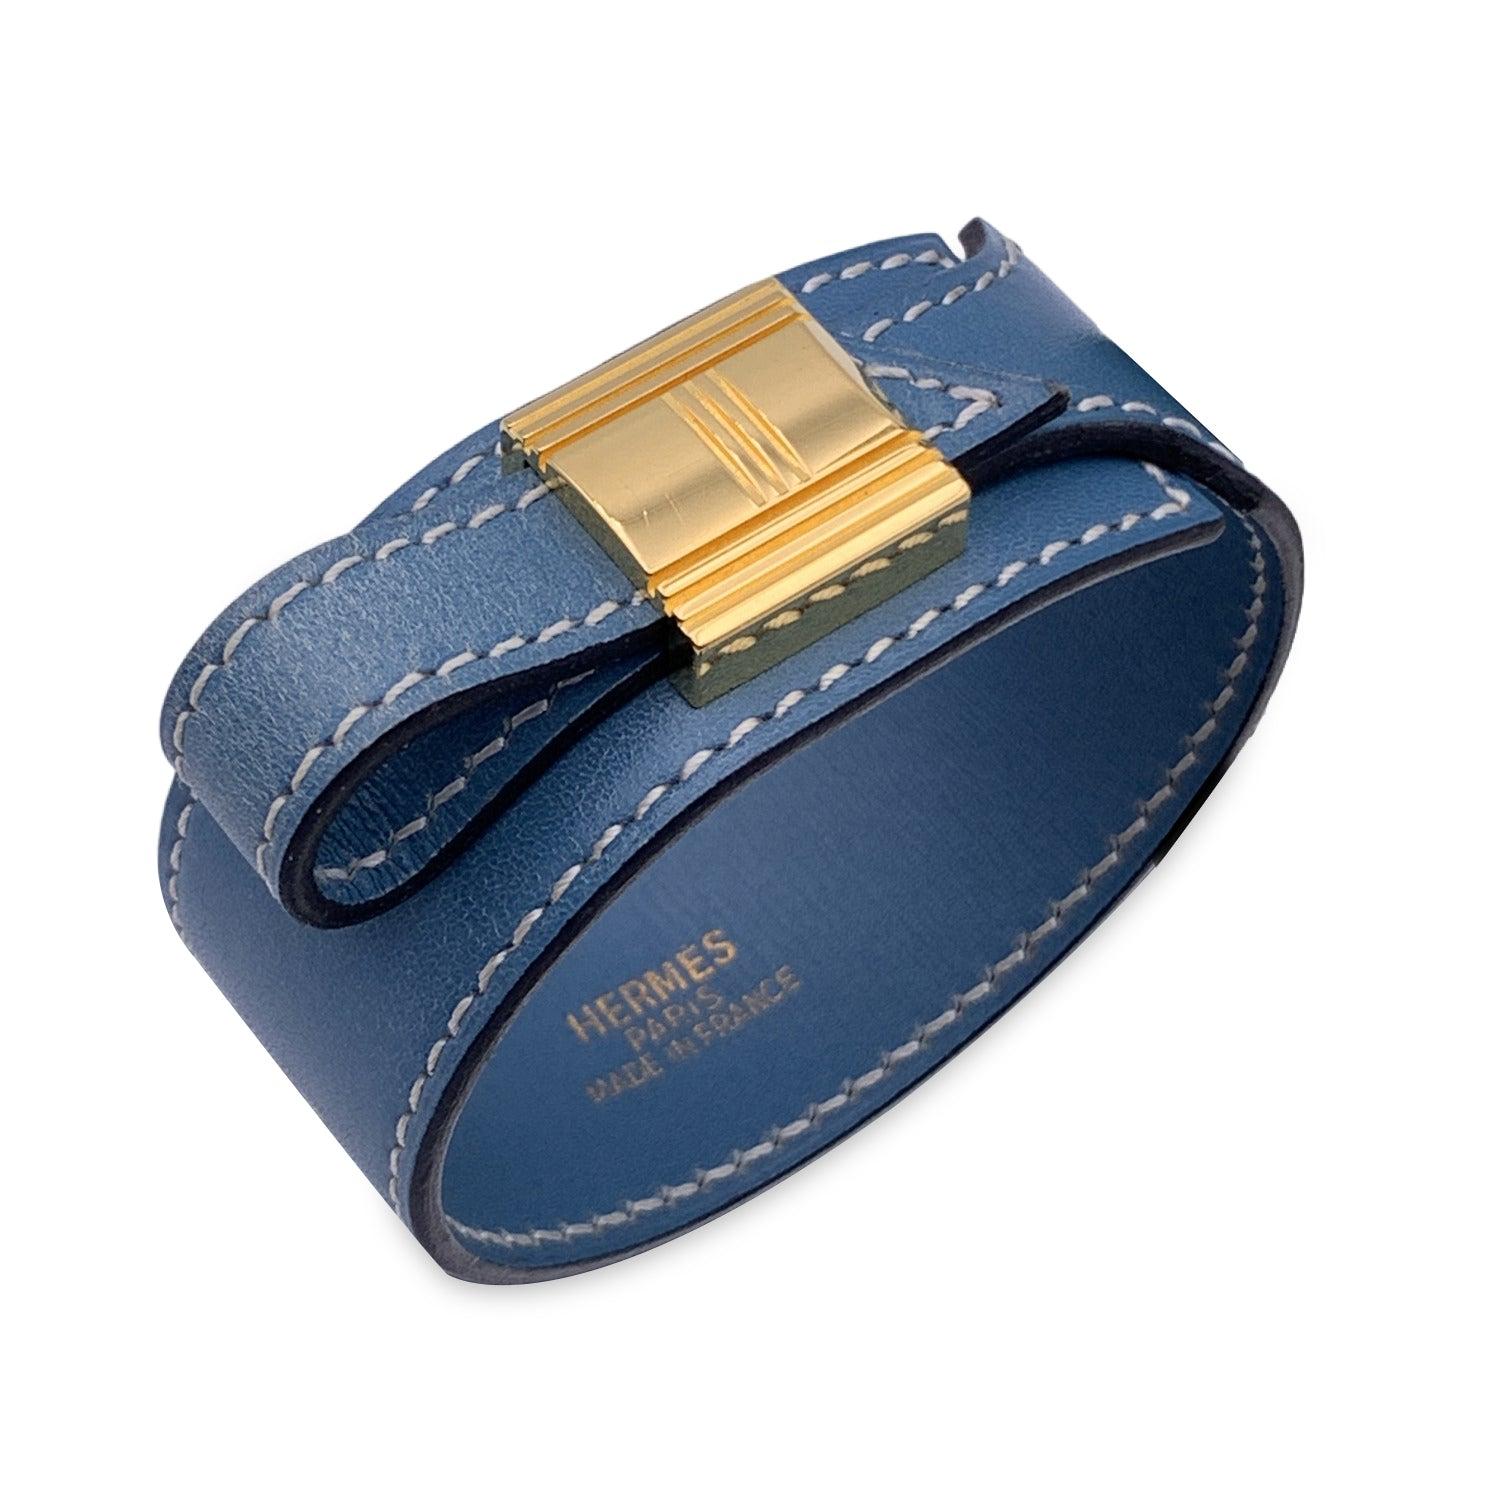 Vintage Hermes 'Artemis' leather bracelet in blue color. Gold buckle. For wrists up to 16 inches - 15.2 cm in circumference. 'Hermes Paris - made in France' embossed inside the bracelet. Blind stamp is a B encased in a Square (year of production